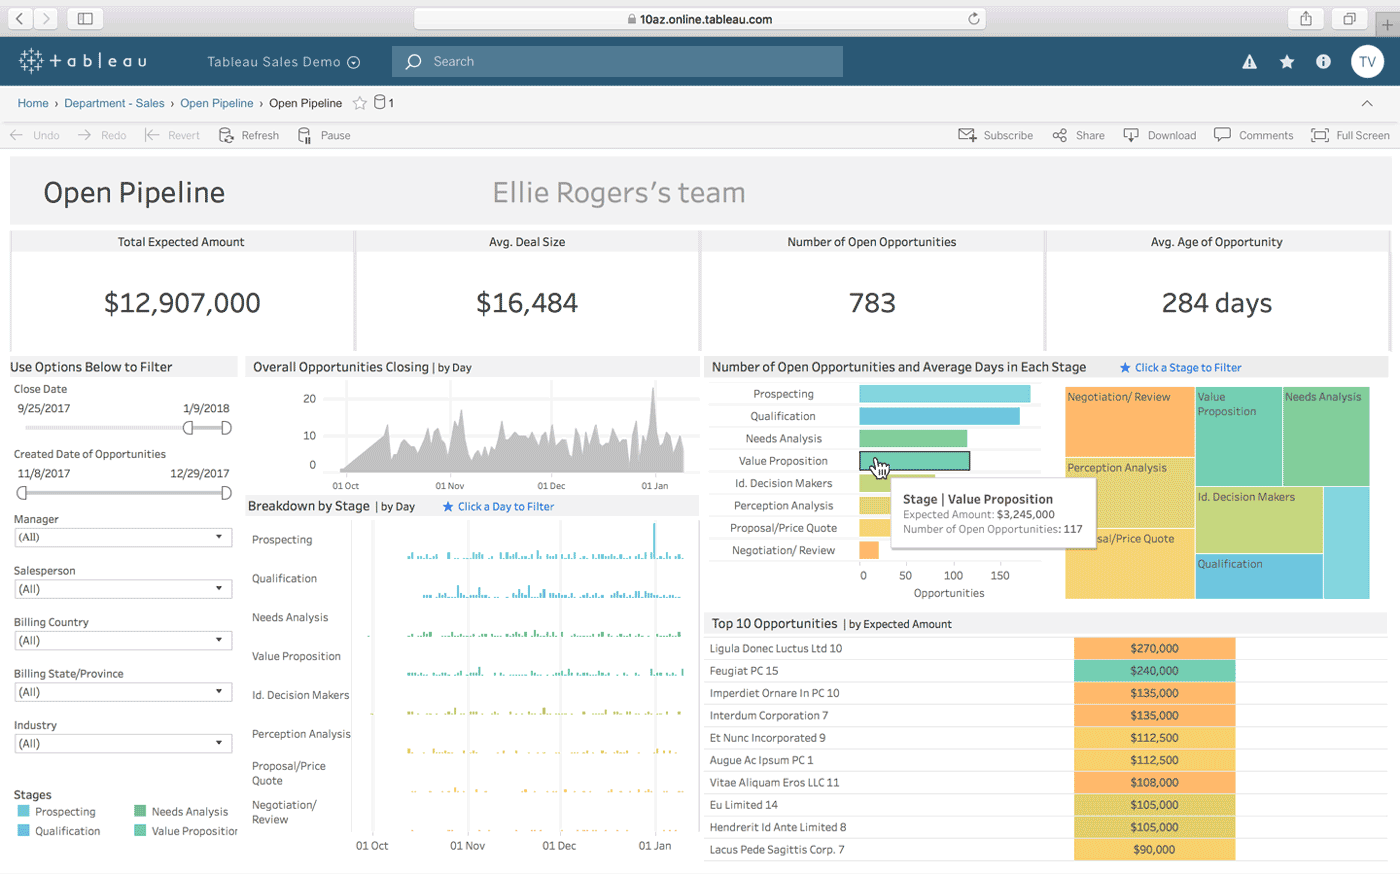 A screenshot of Tableau, one of the best reporting tools on the market.